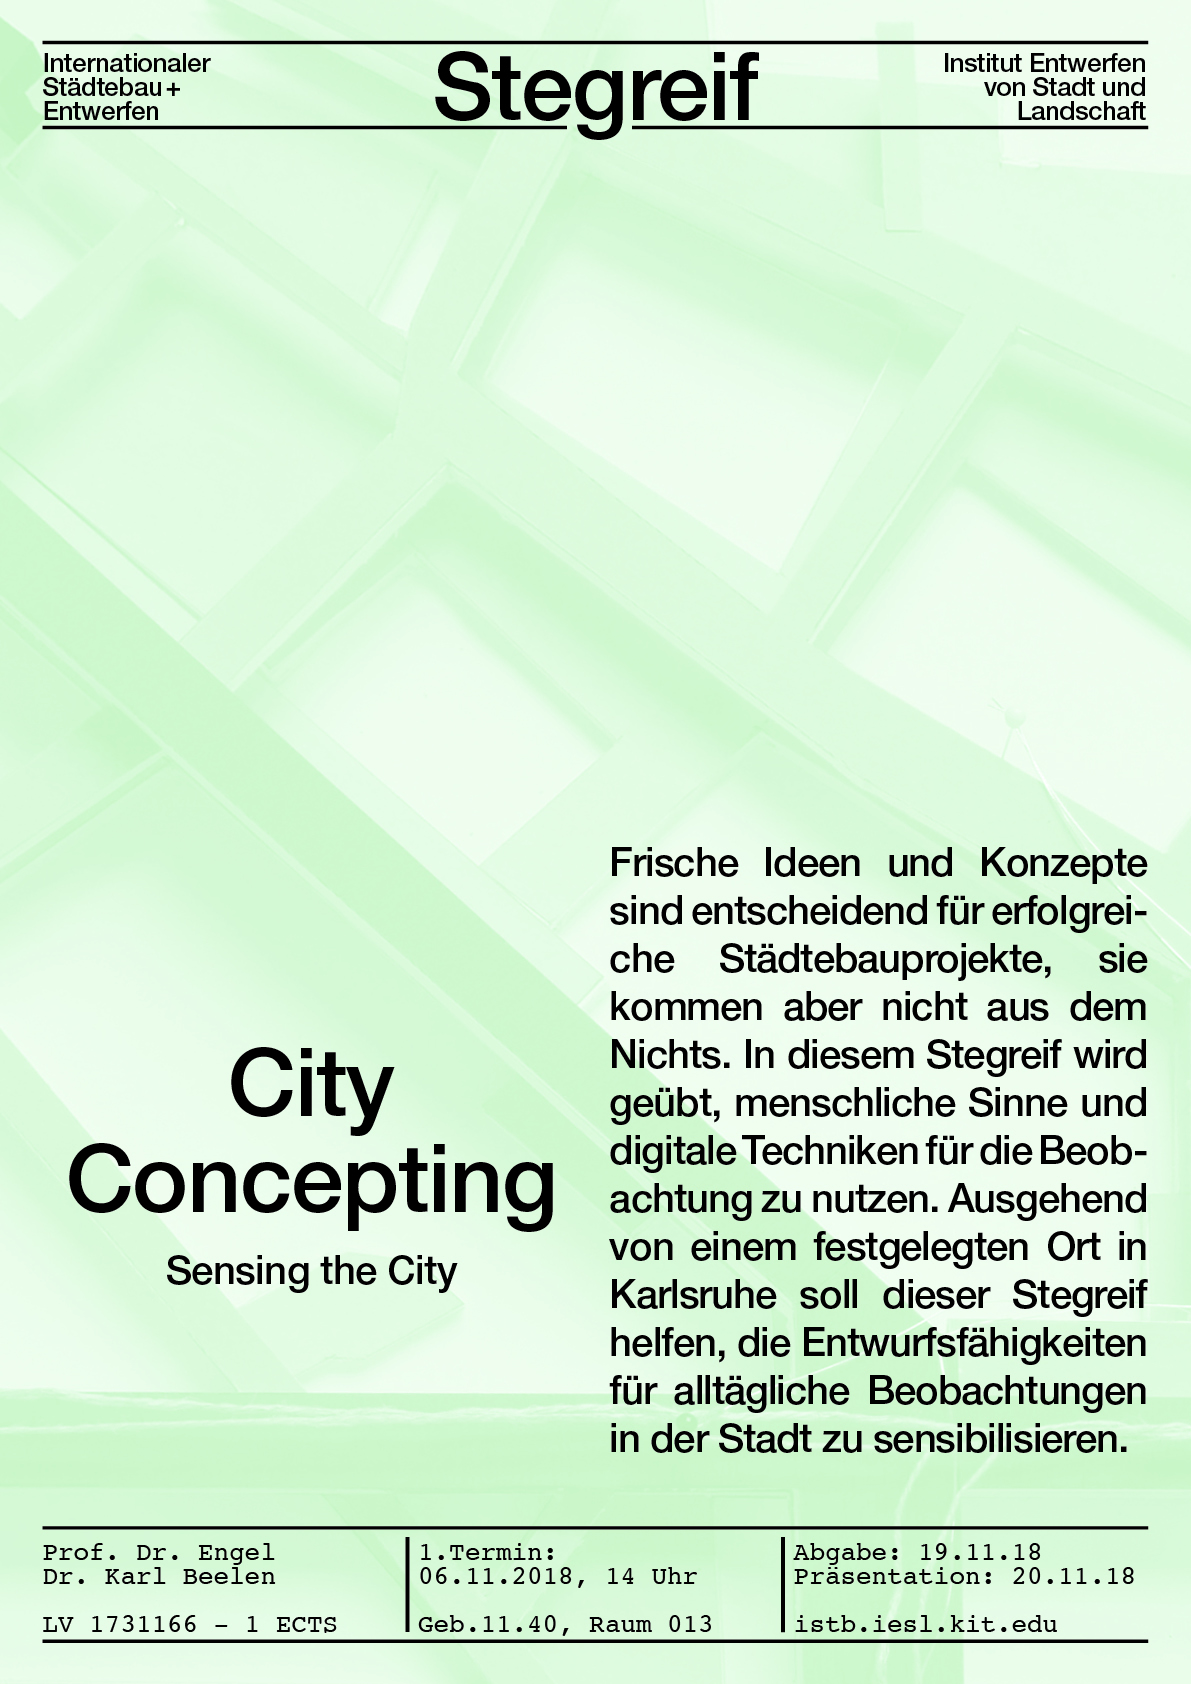 Stegreif: City Concepting - Sensing the City